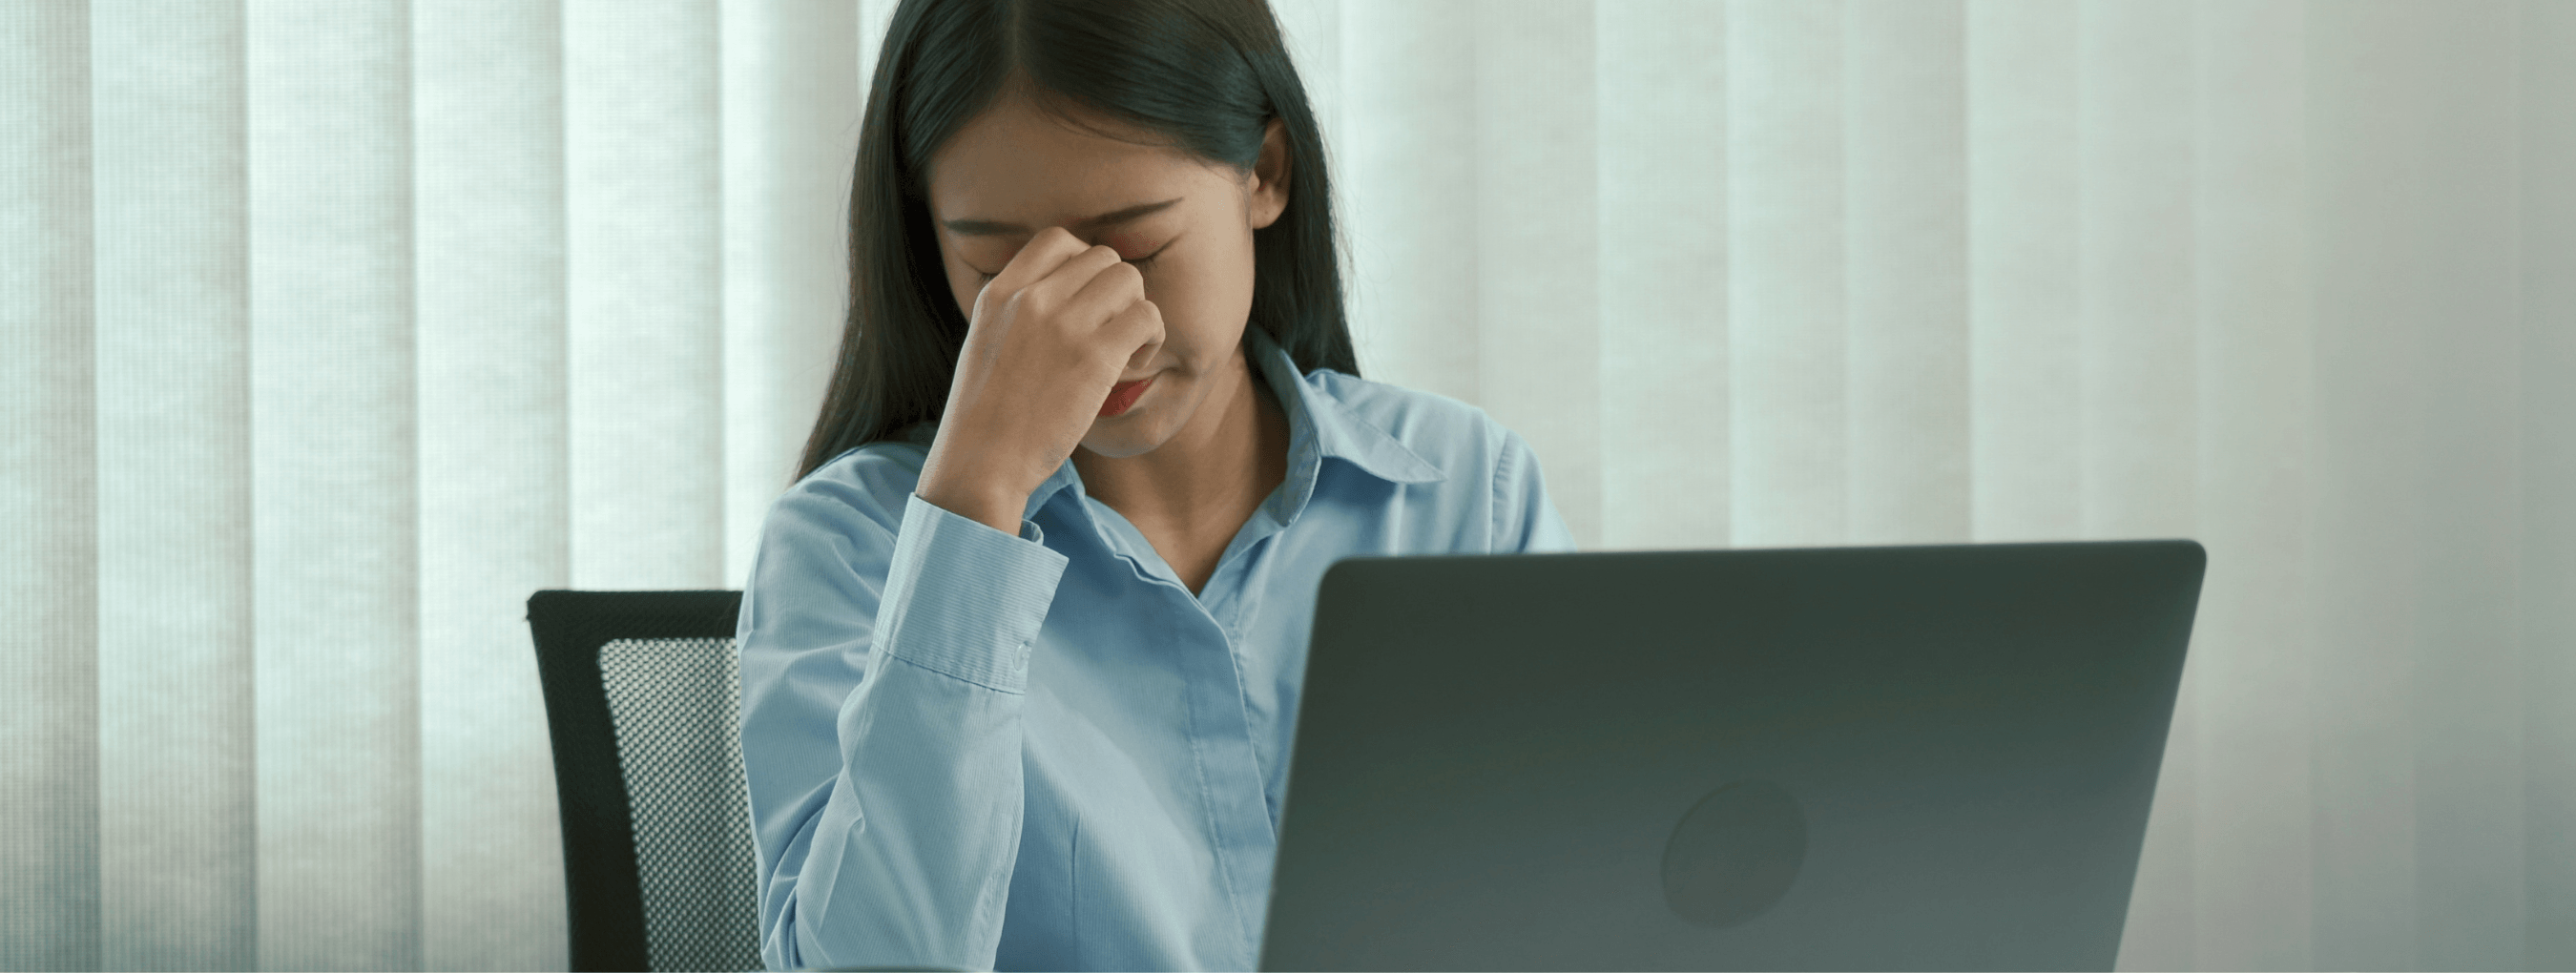 How to Recognize and Respond to Third-Party Harassment in the Workplace